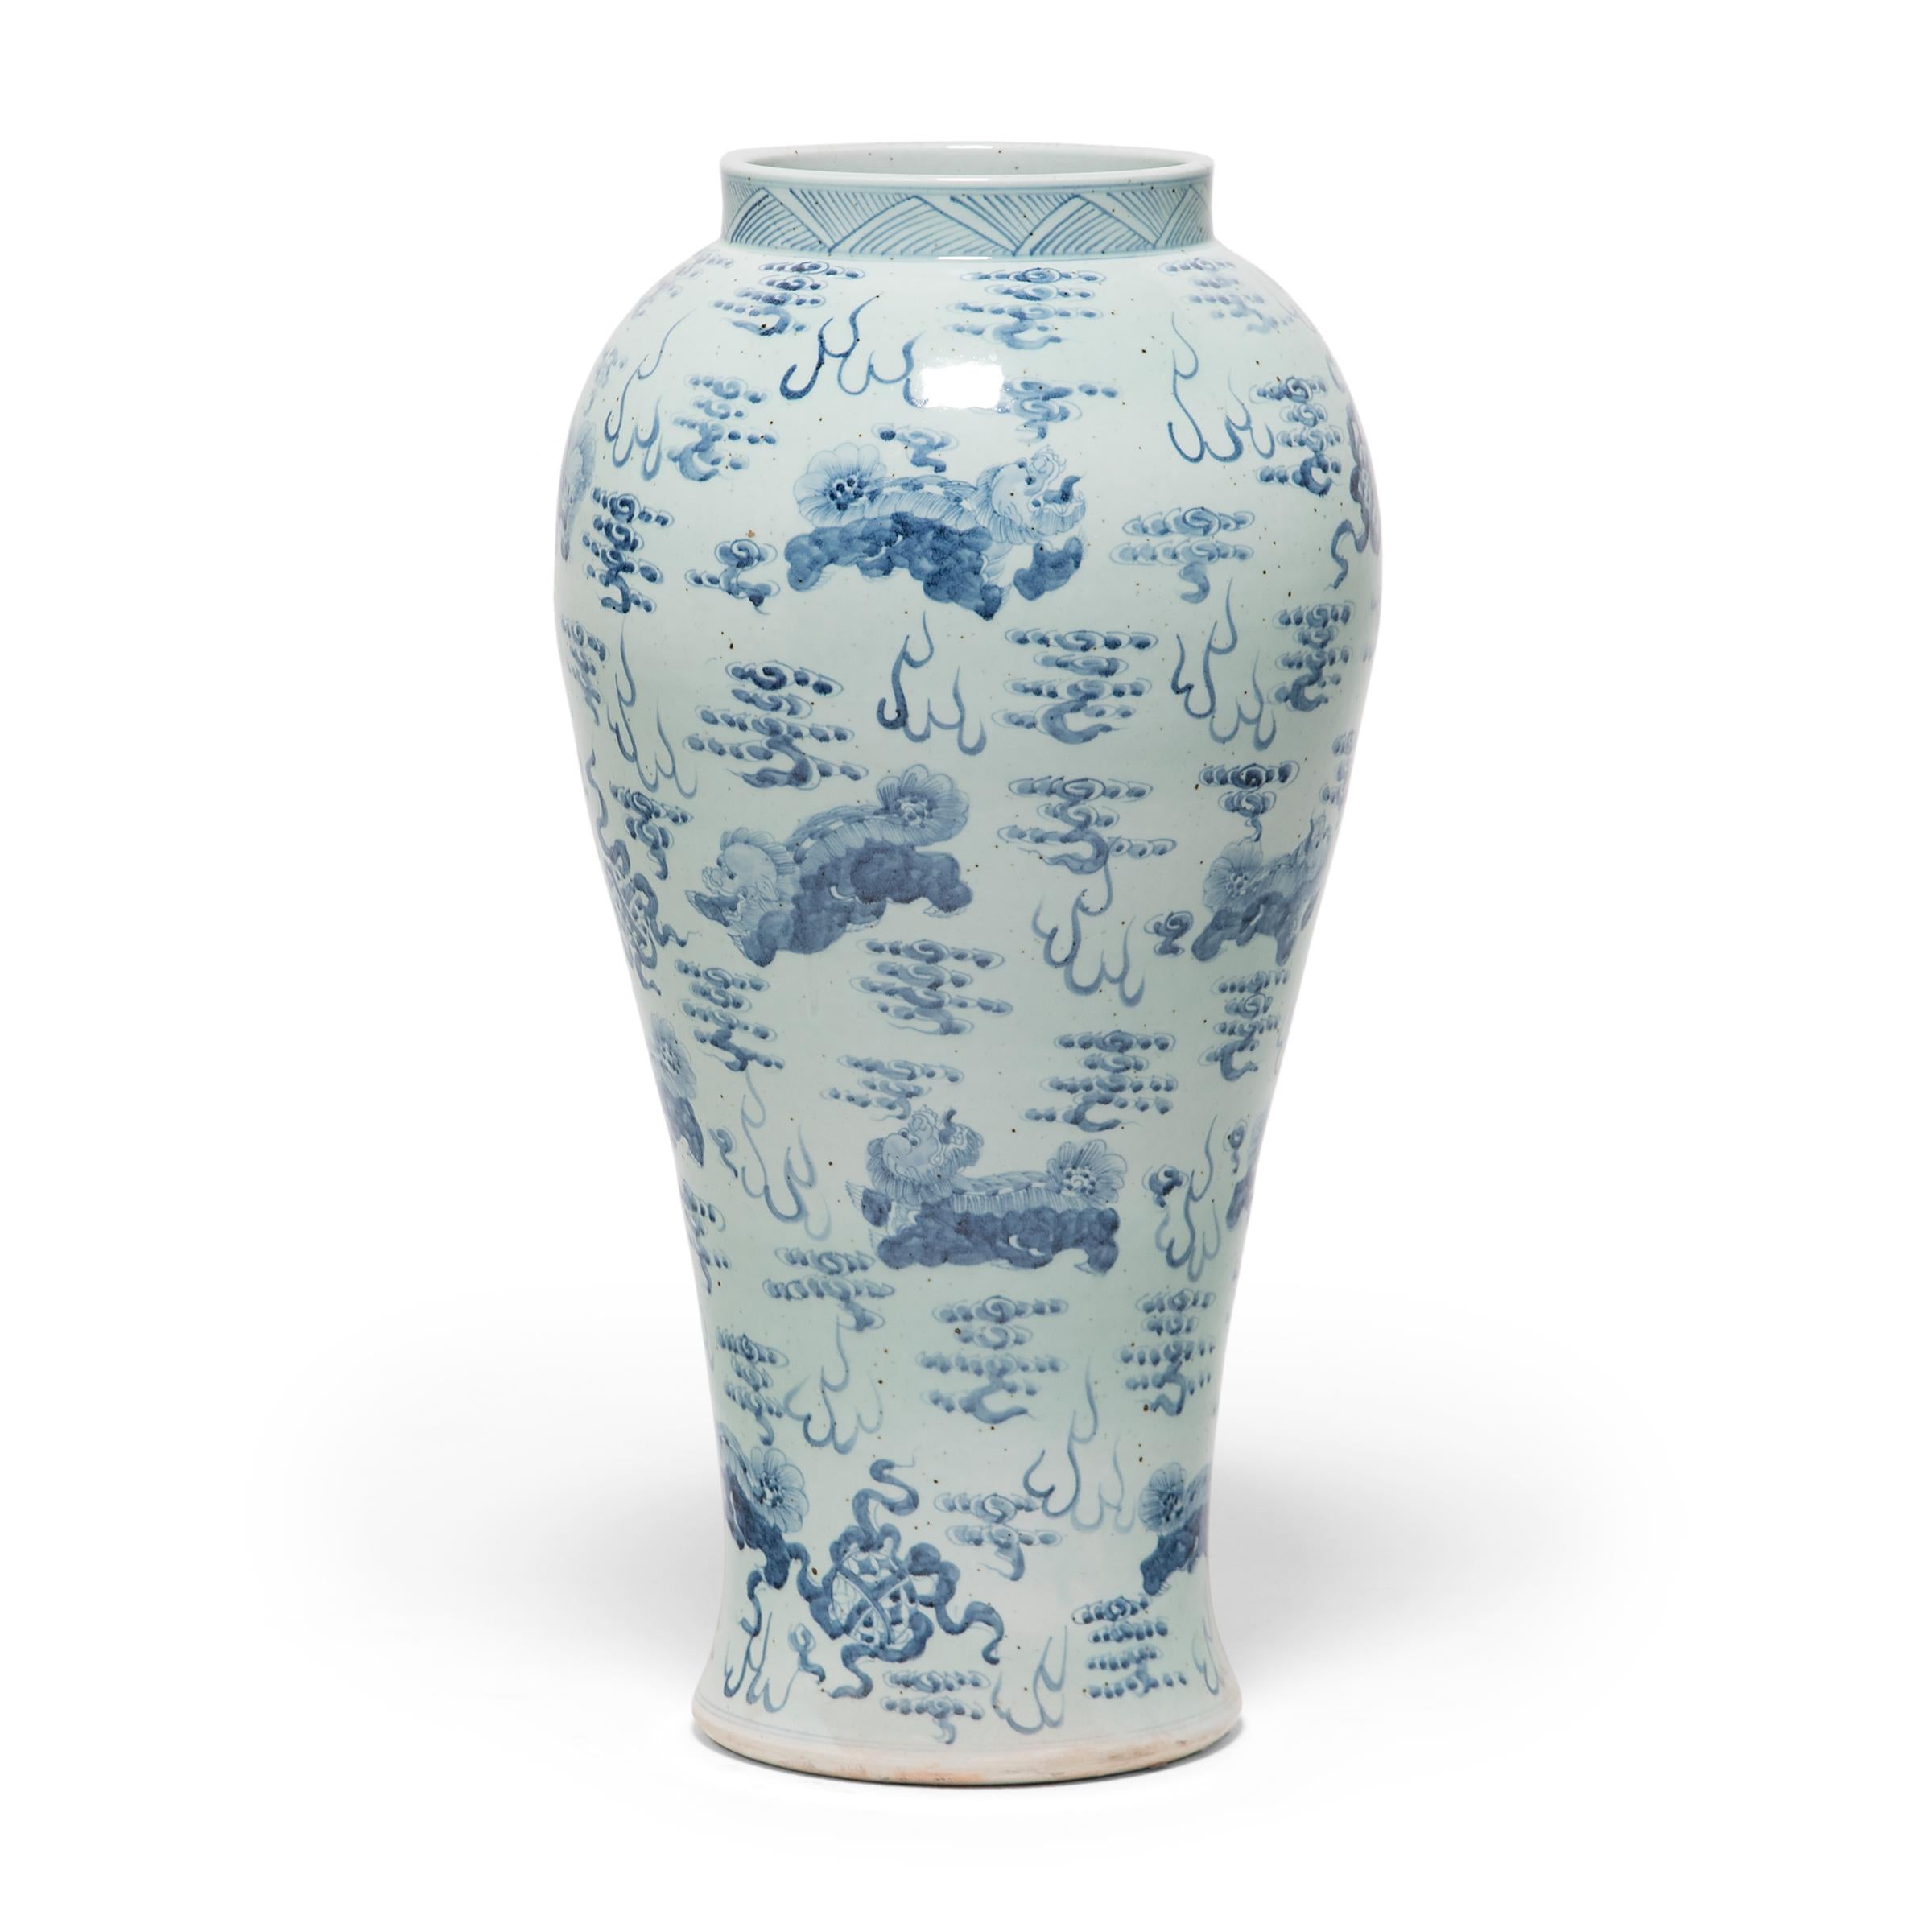 Beautifully rendered with expressive brushwork, the painted decoration on this monumental baluster jar demonstrates the exceptional artistry of Chinese blue-and-white porcelain. Guardian fu lion dogs float amidst celestial clouds, playfully chasing